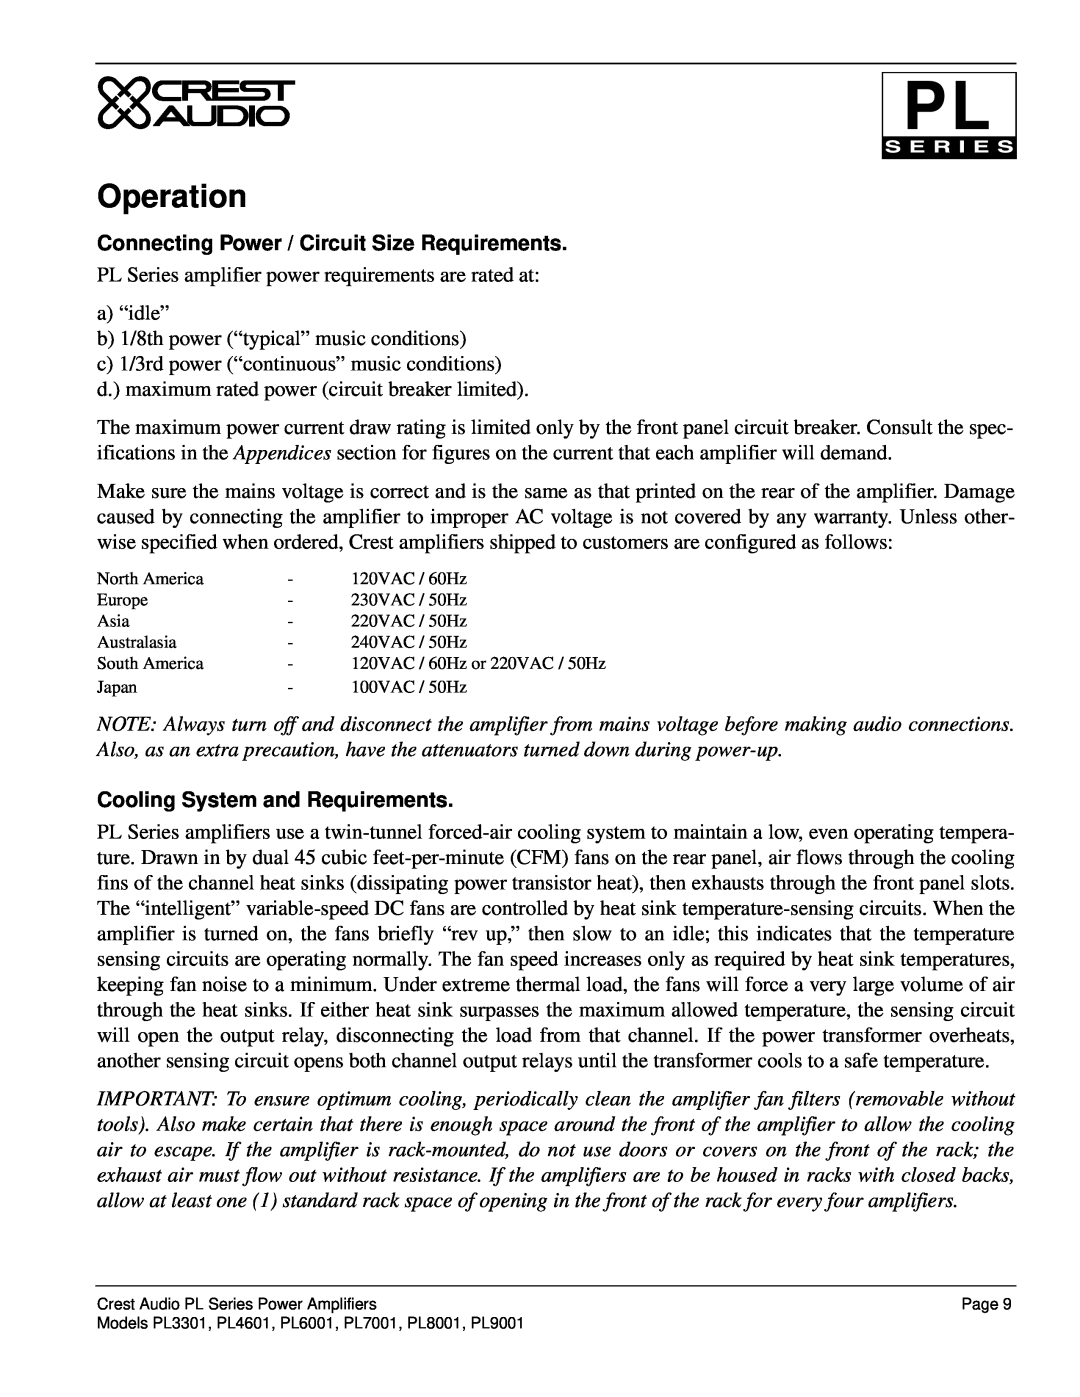 Peavey PL Series owner manual Operation, Connecting Power / Circuit Size Requirements, Cooling System and Requirements 